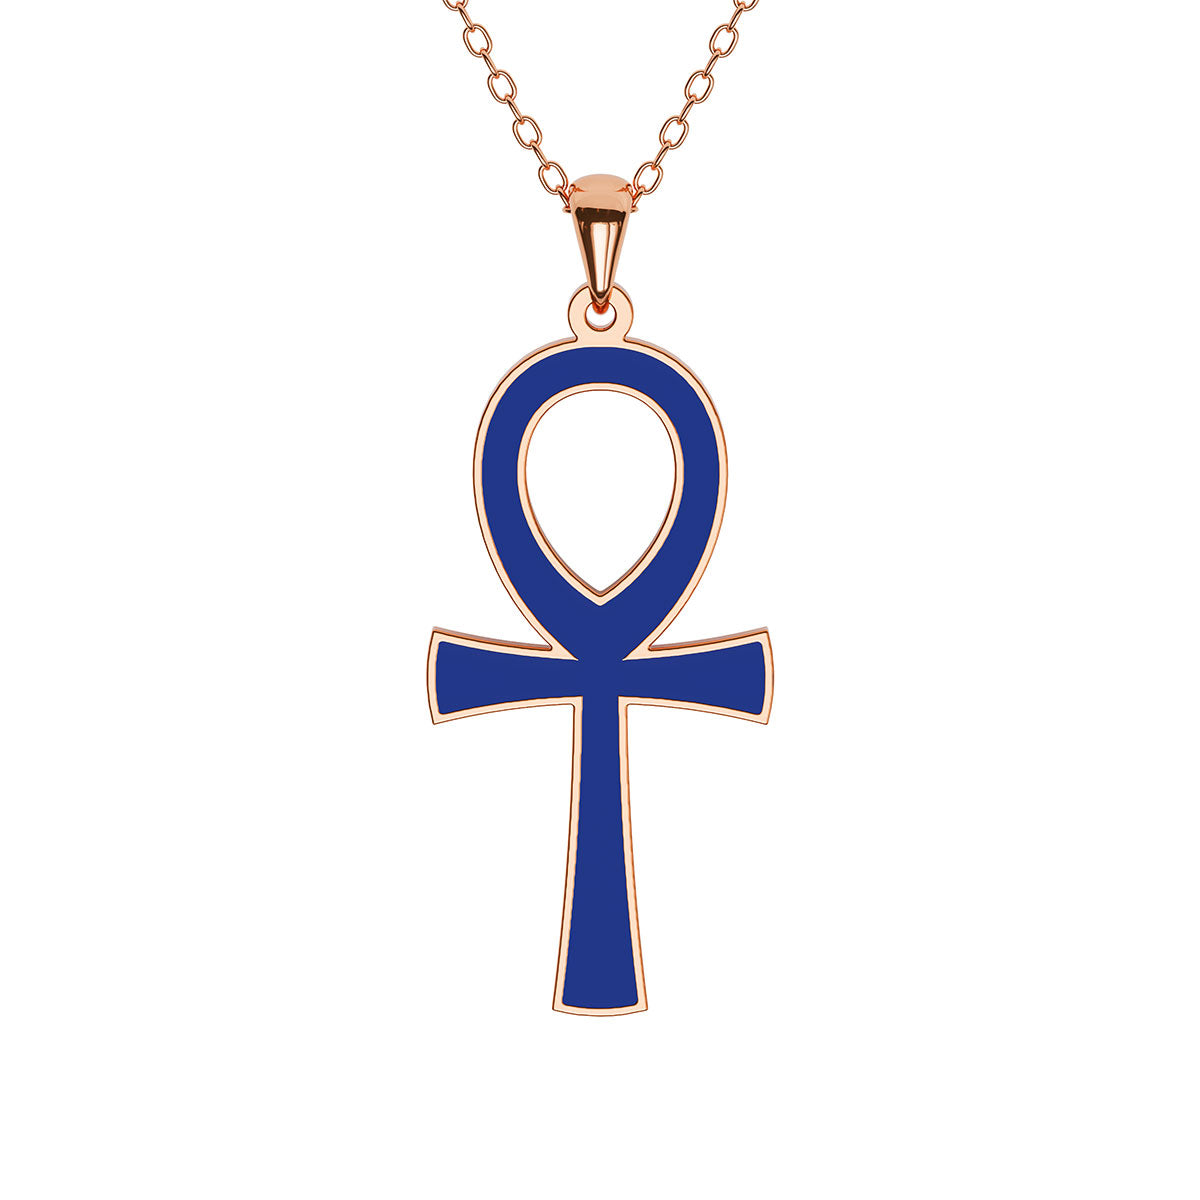 Key Of Life Egyptian Cross Gold Ankh Pendant Gold/Silver/Copper With Iced  Zircon HipHop Jewelry For Men And Women From Chengzhisuda, $5.99 |  DHgate.Com